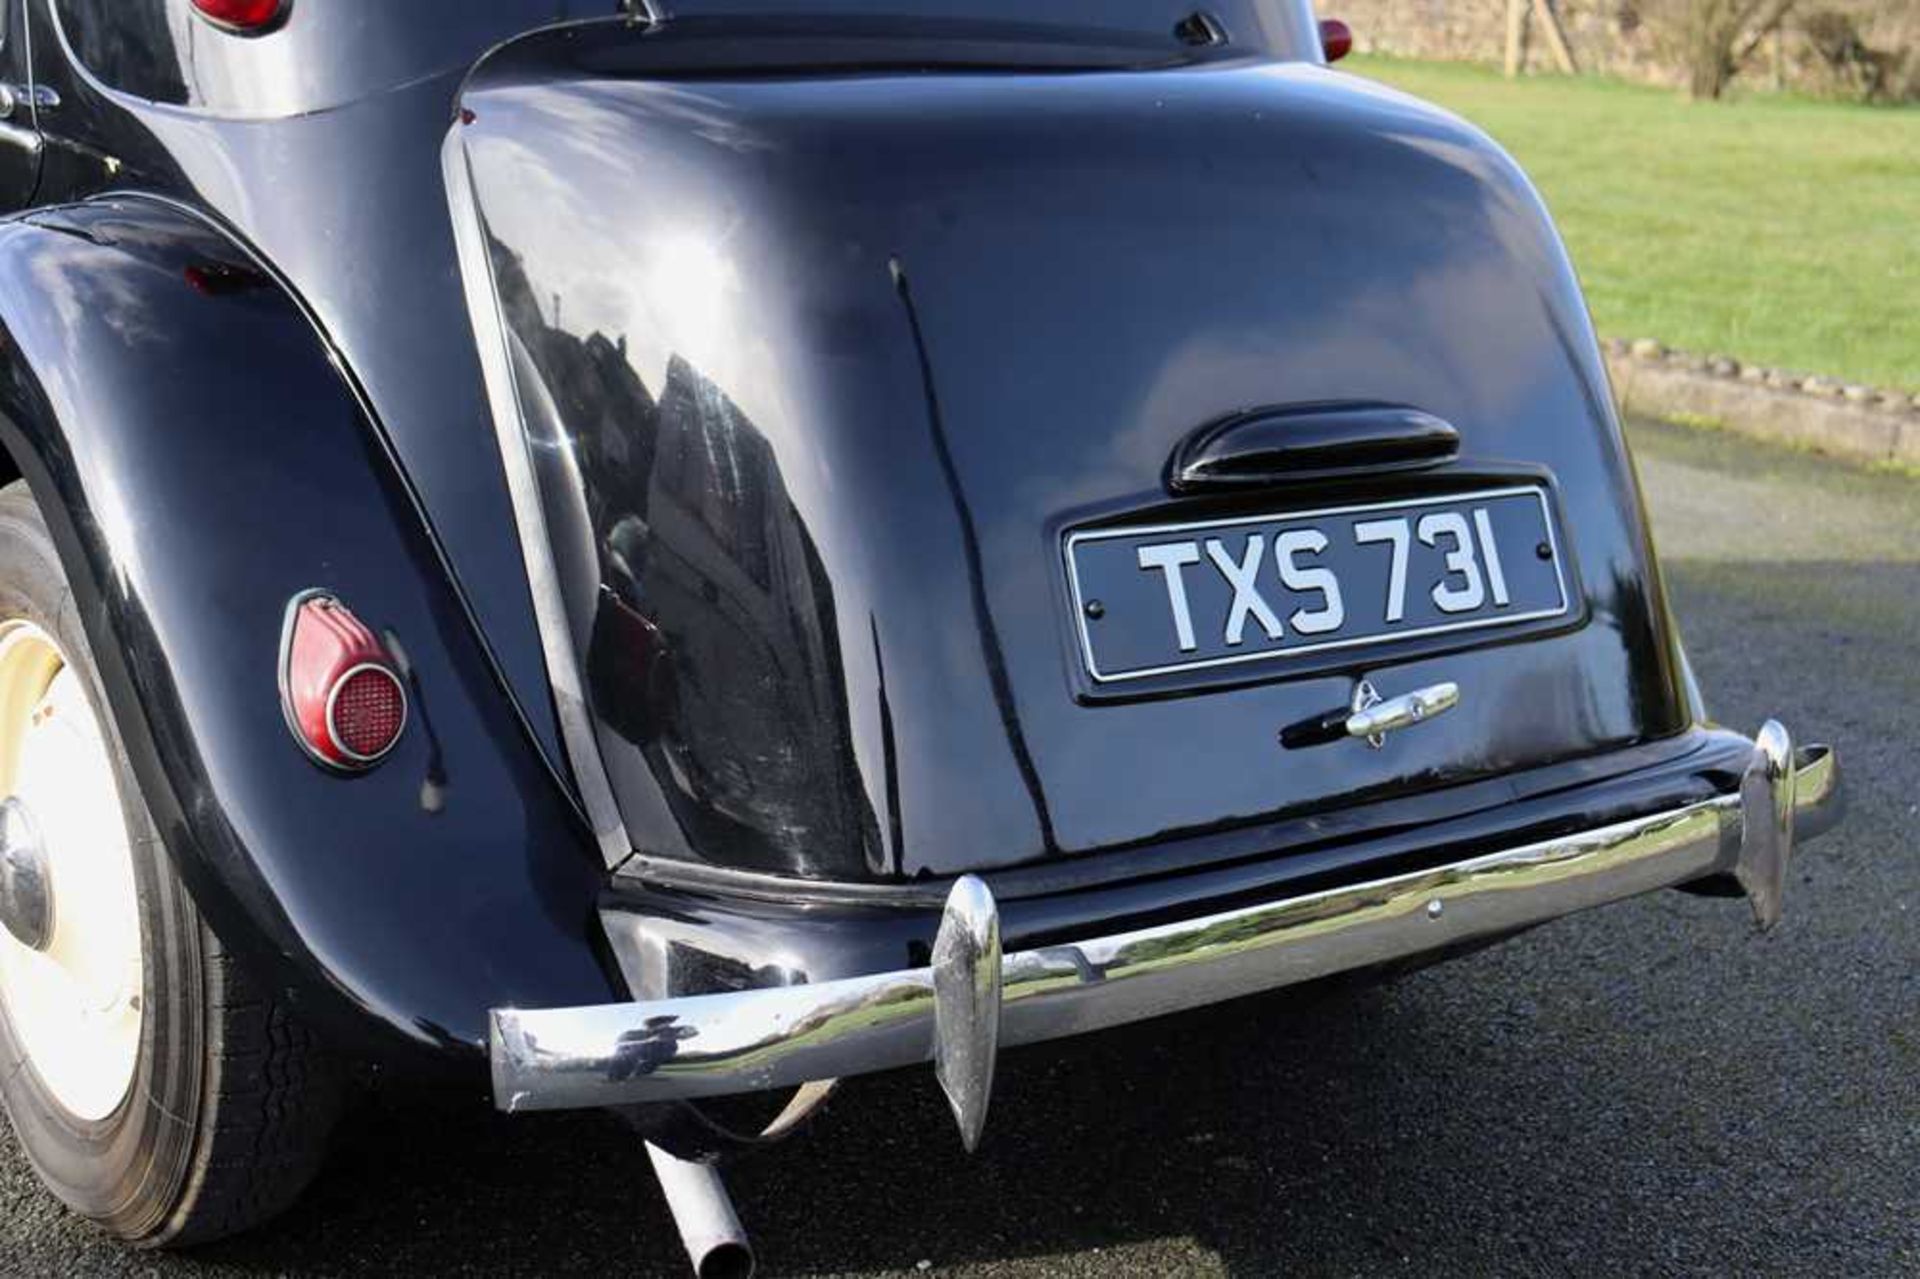 1952 Citroën 11BL Traction Avant In current ownership for over 40 years - Image 33 of 60